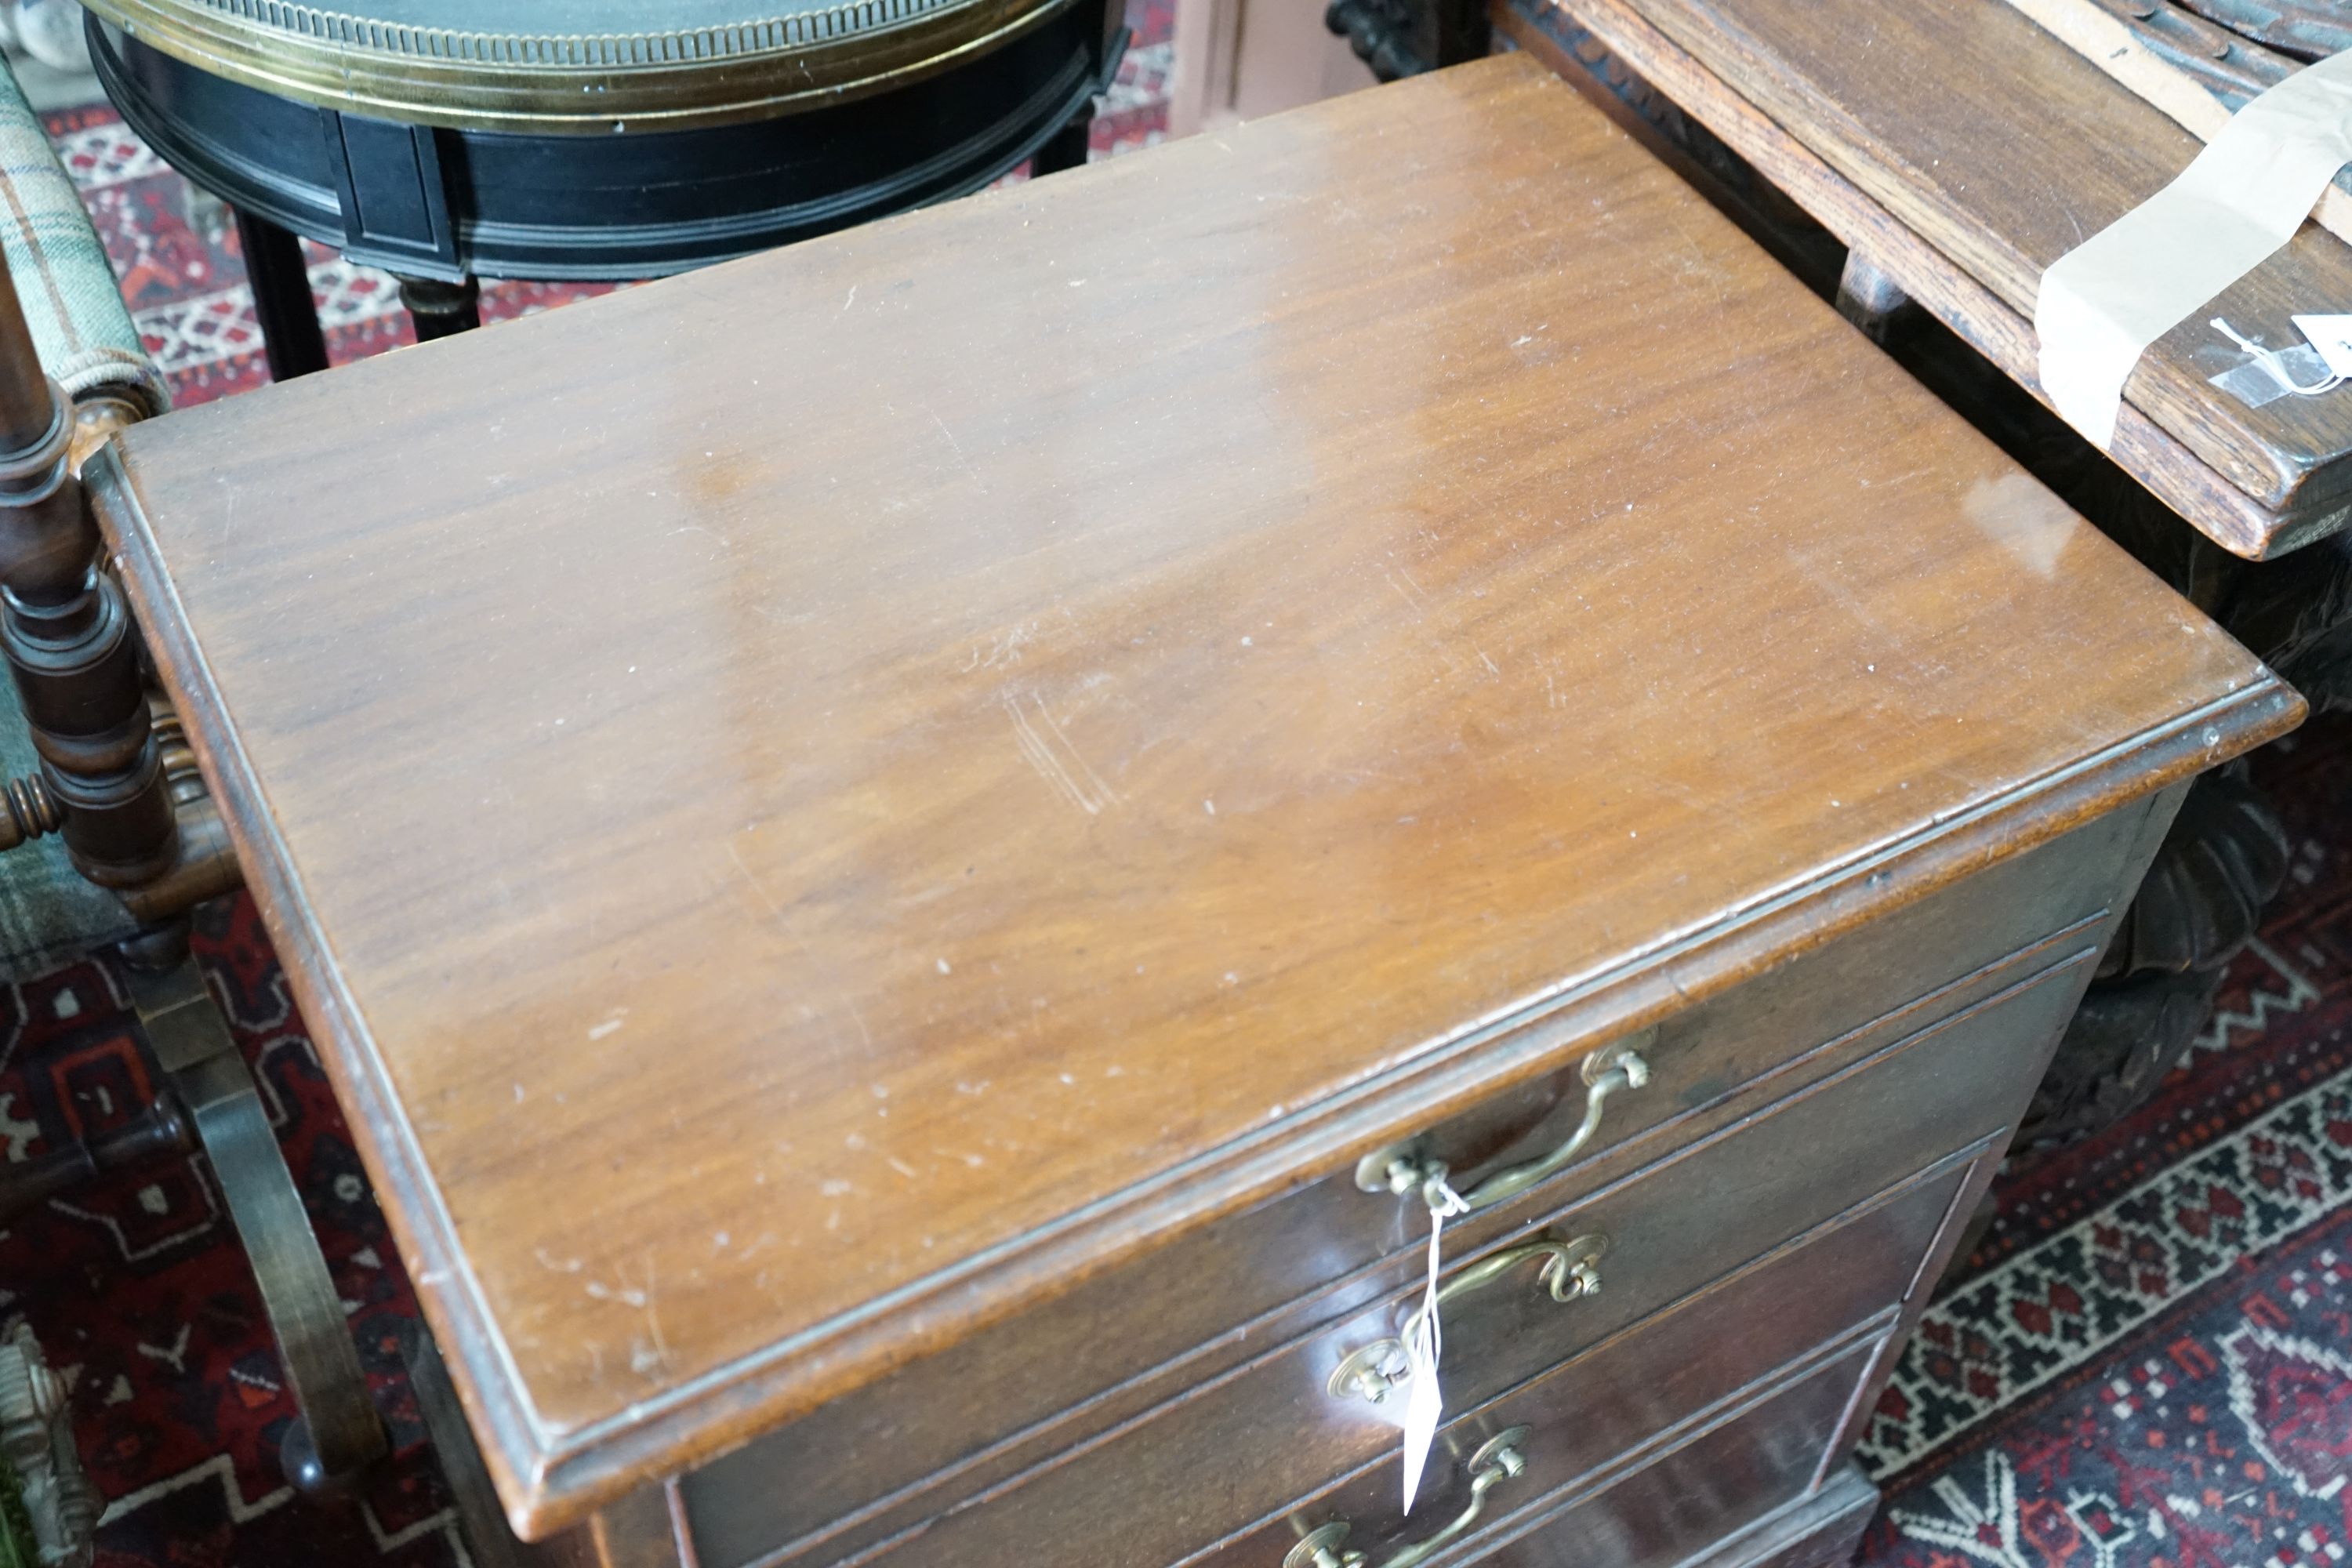 A 19th century mahogany hinged top commode with dummy drawer front, width 65cm, depth 47cm, height 71cm